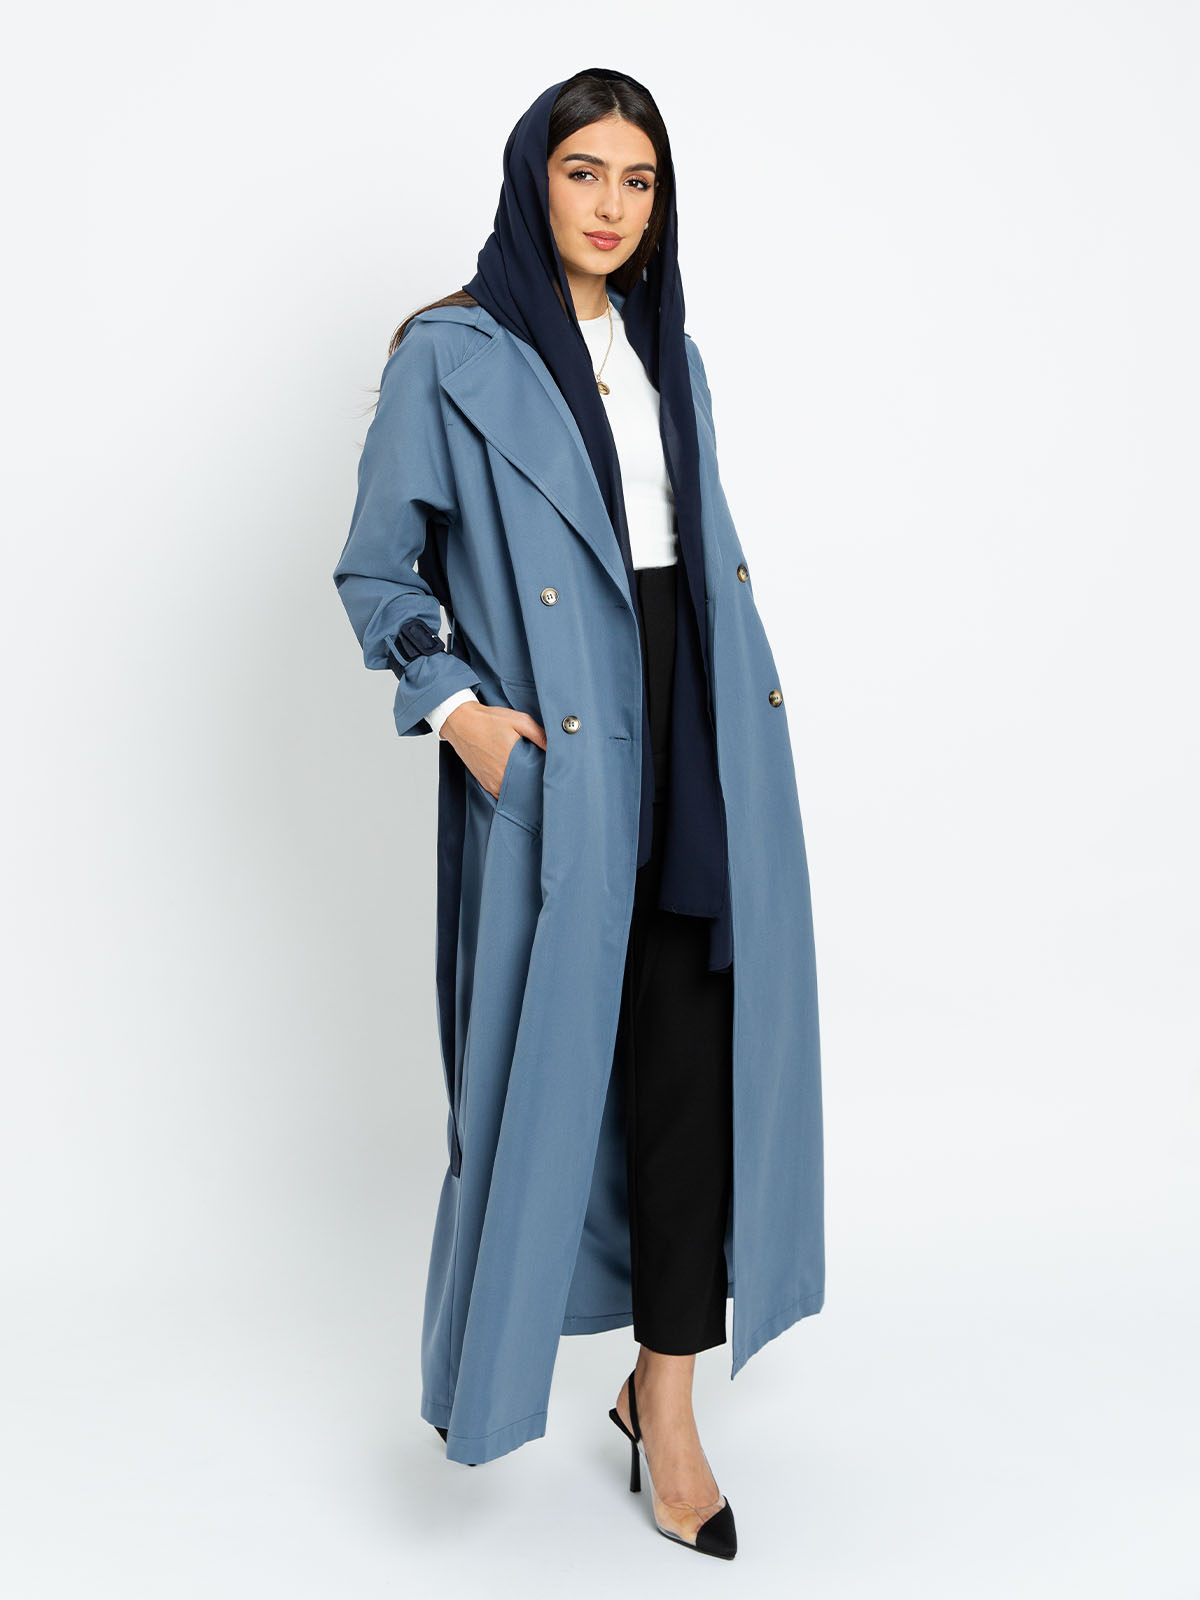 Kaafmeem women clothing regular fit blue coat style long trench abaya for everyday in lyocell fabric for winter or travel 